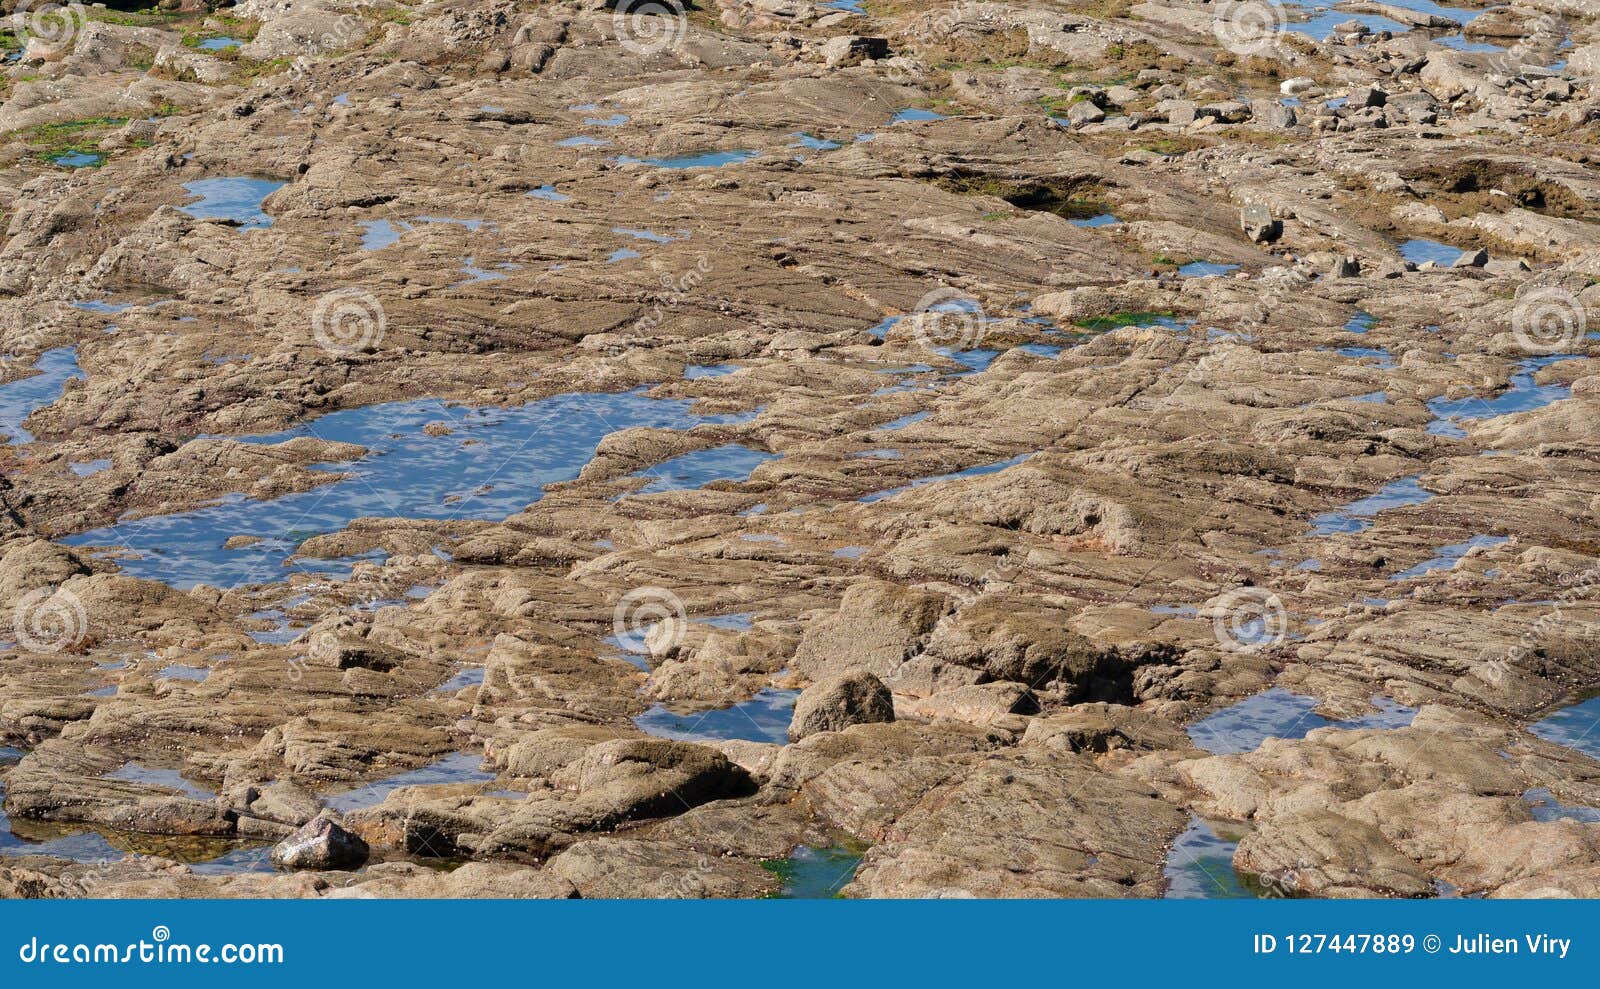 Closeup view of rocks and water pools on seashore for background